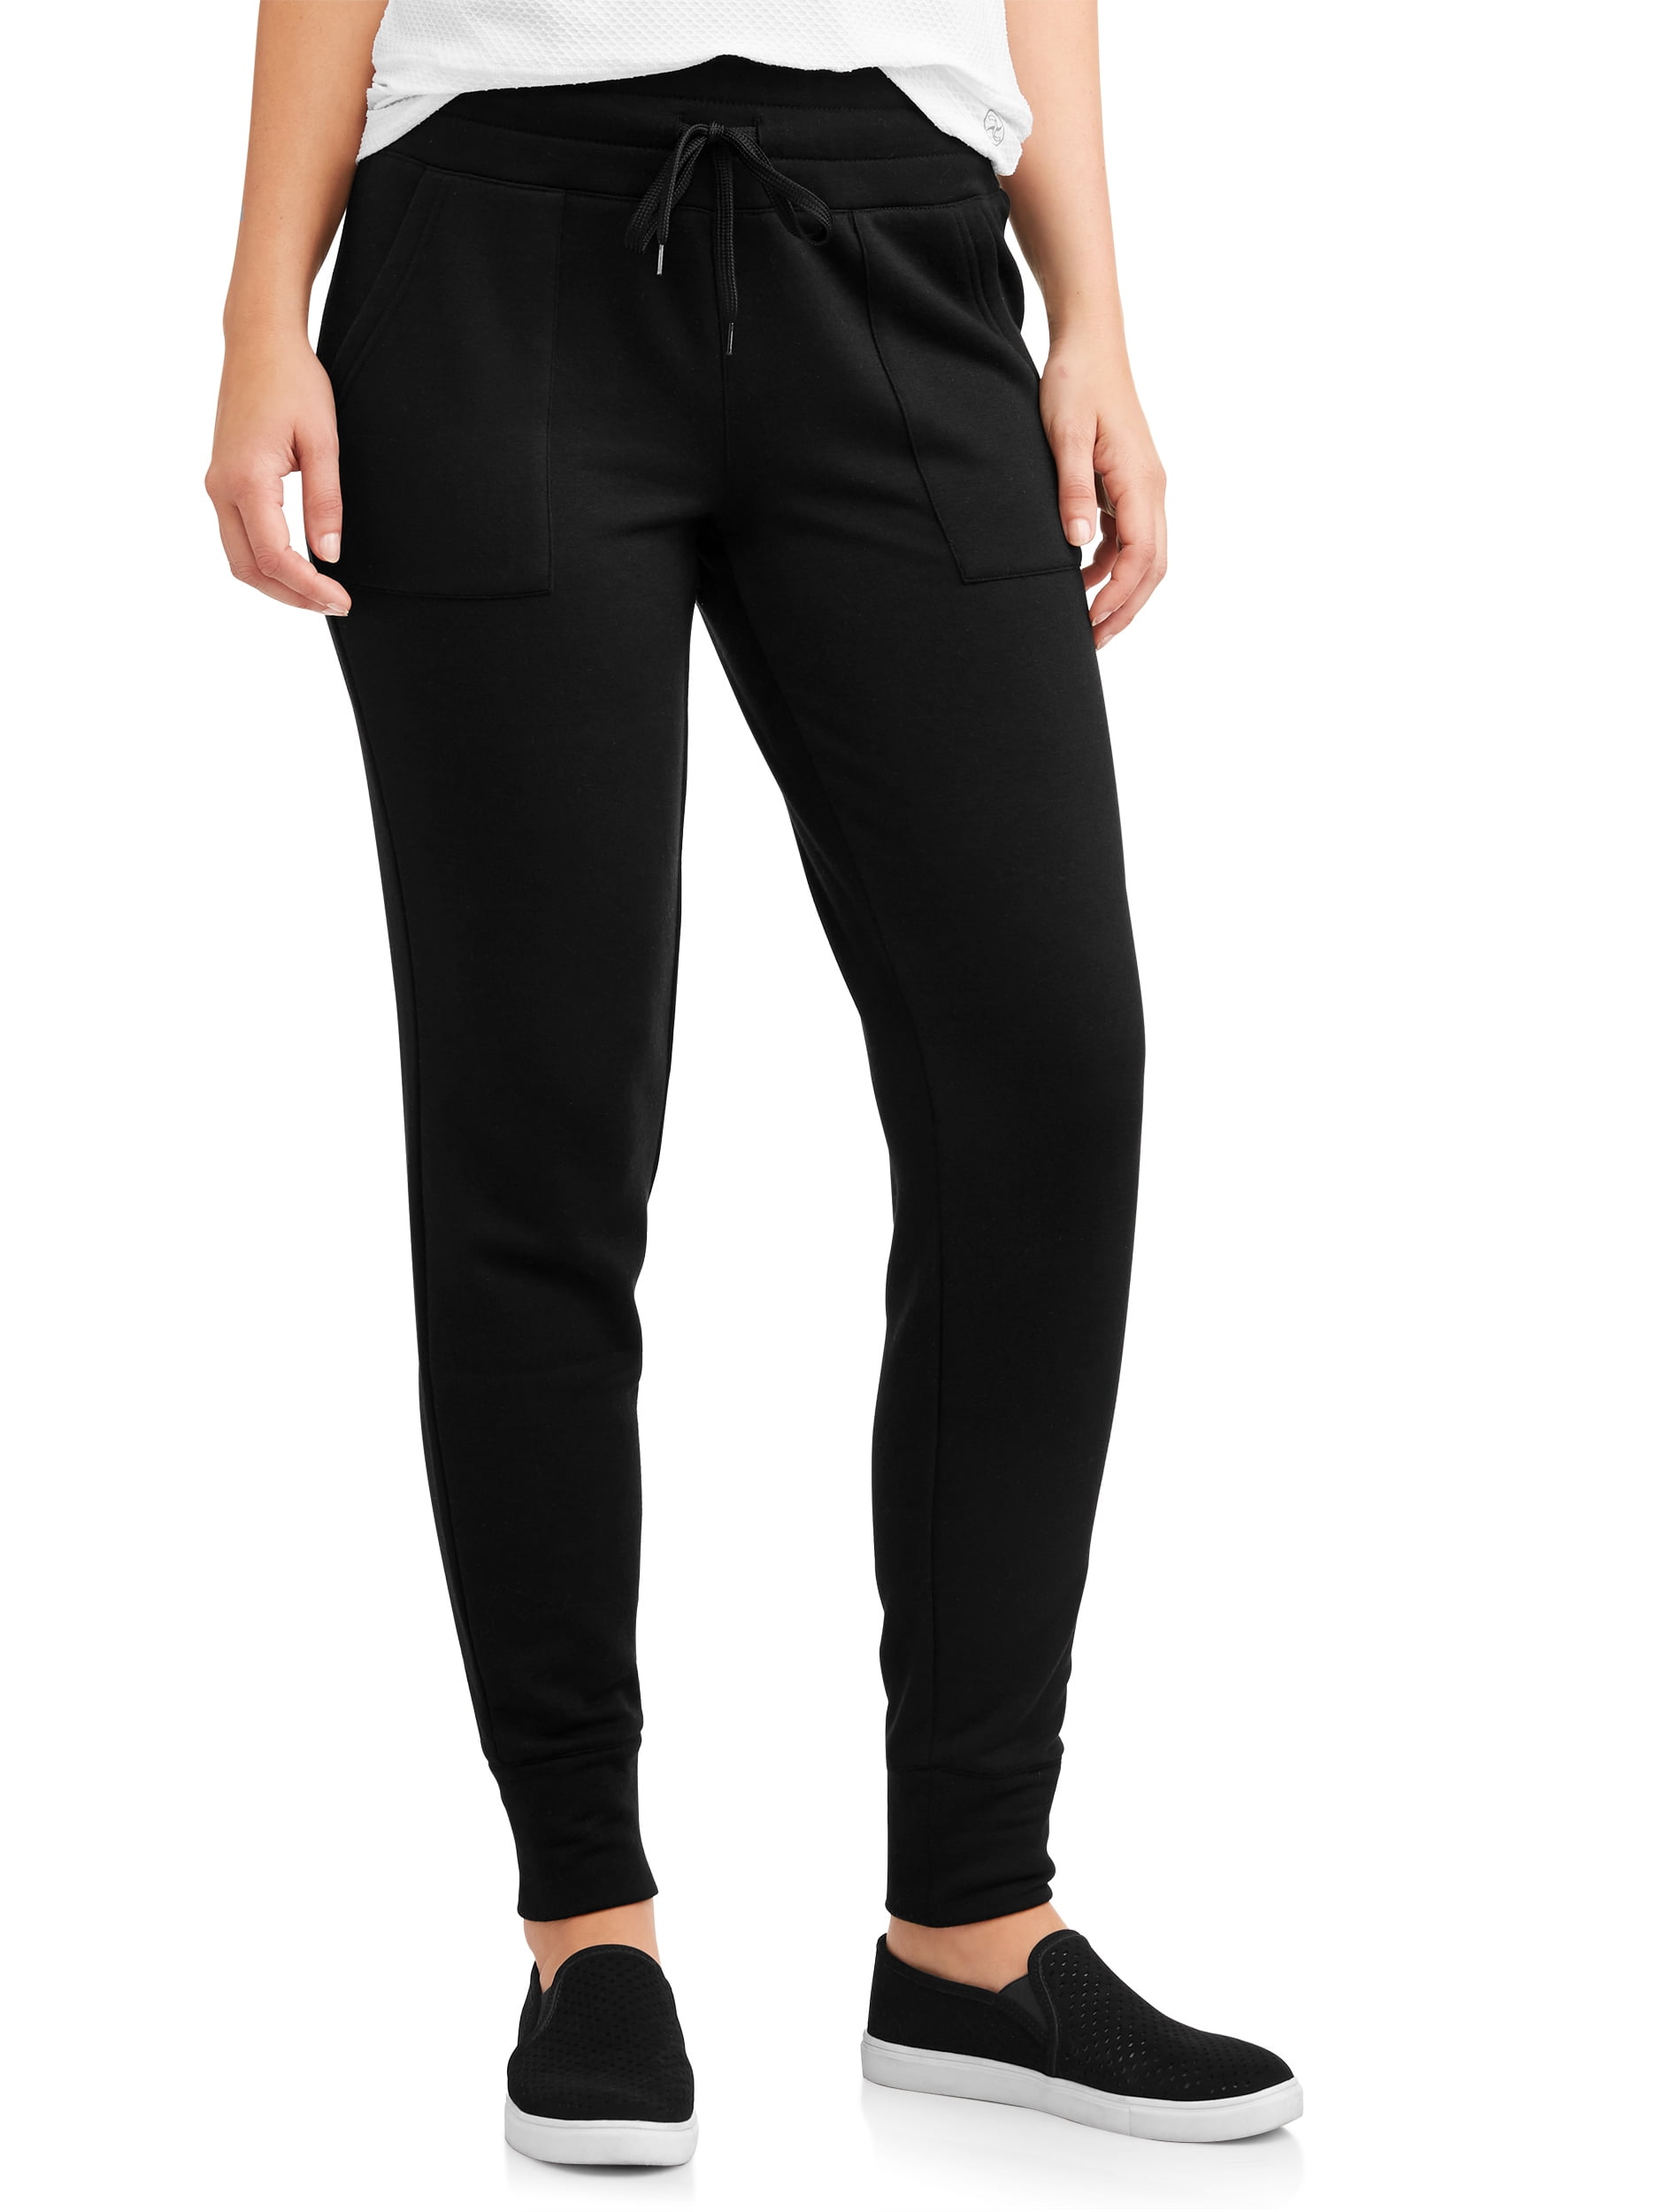 Athletic Works Women's Athleisure Soft Fleece Jogger Pant With